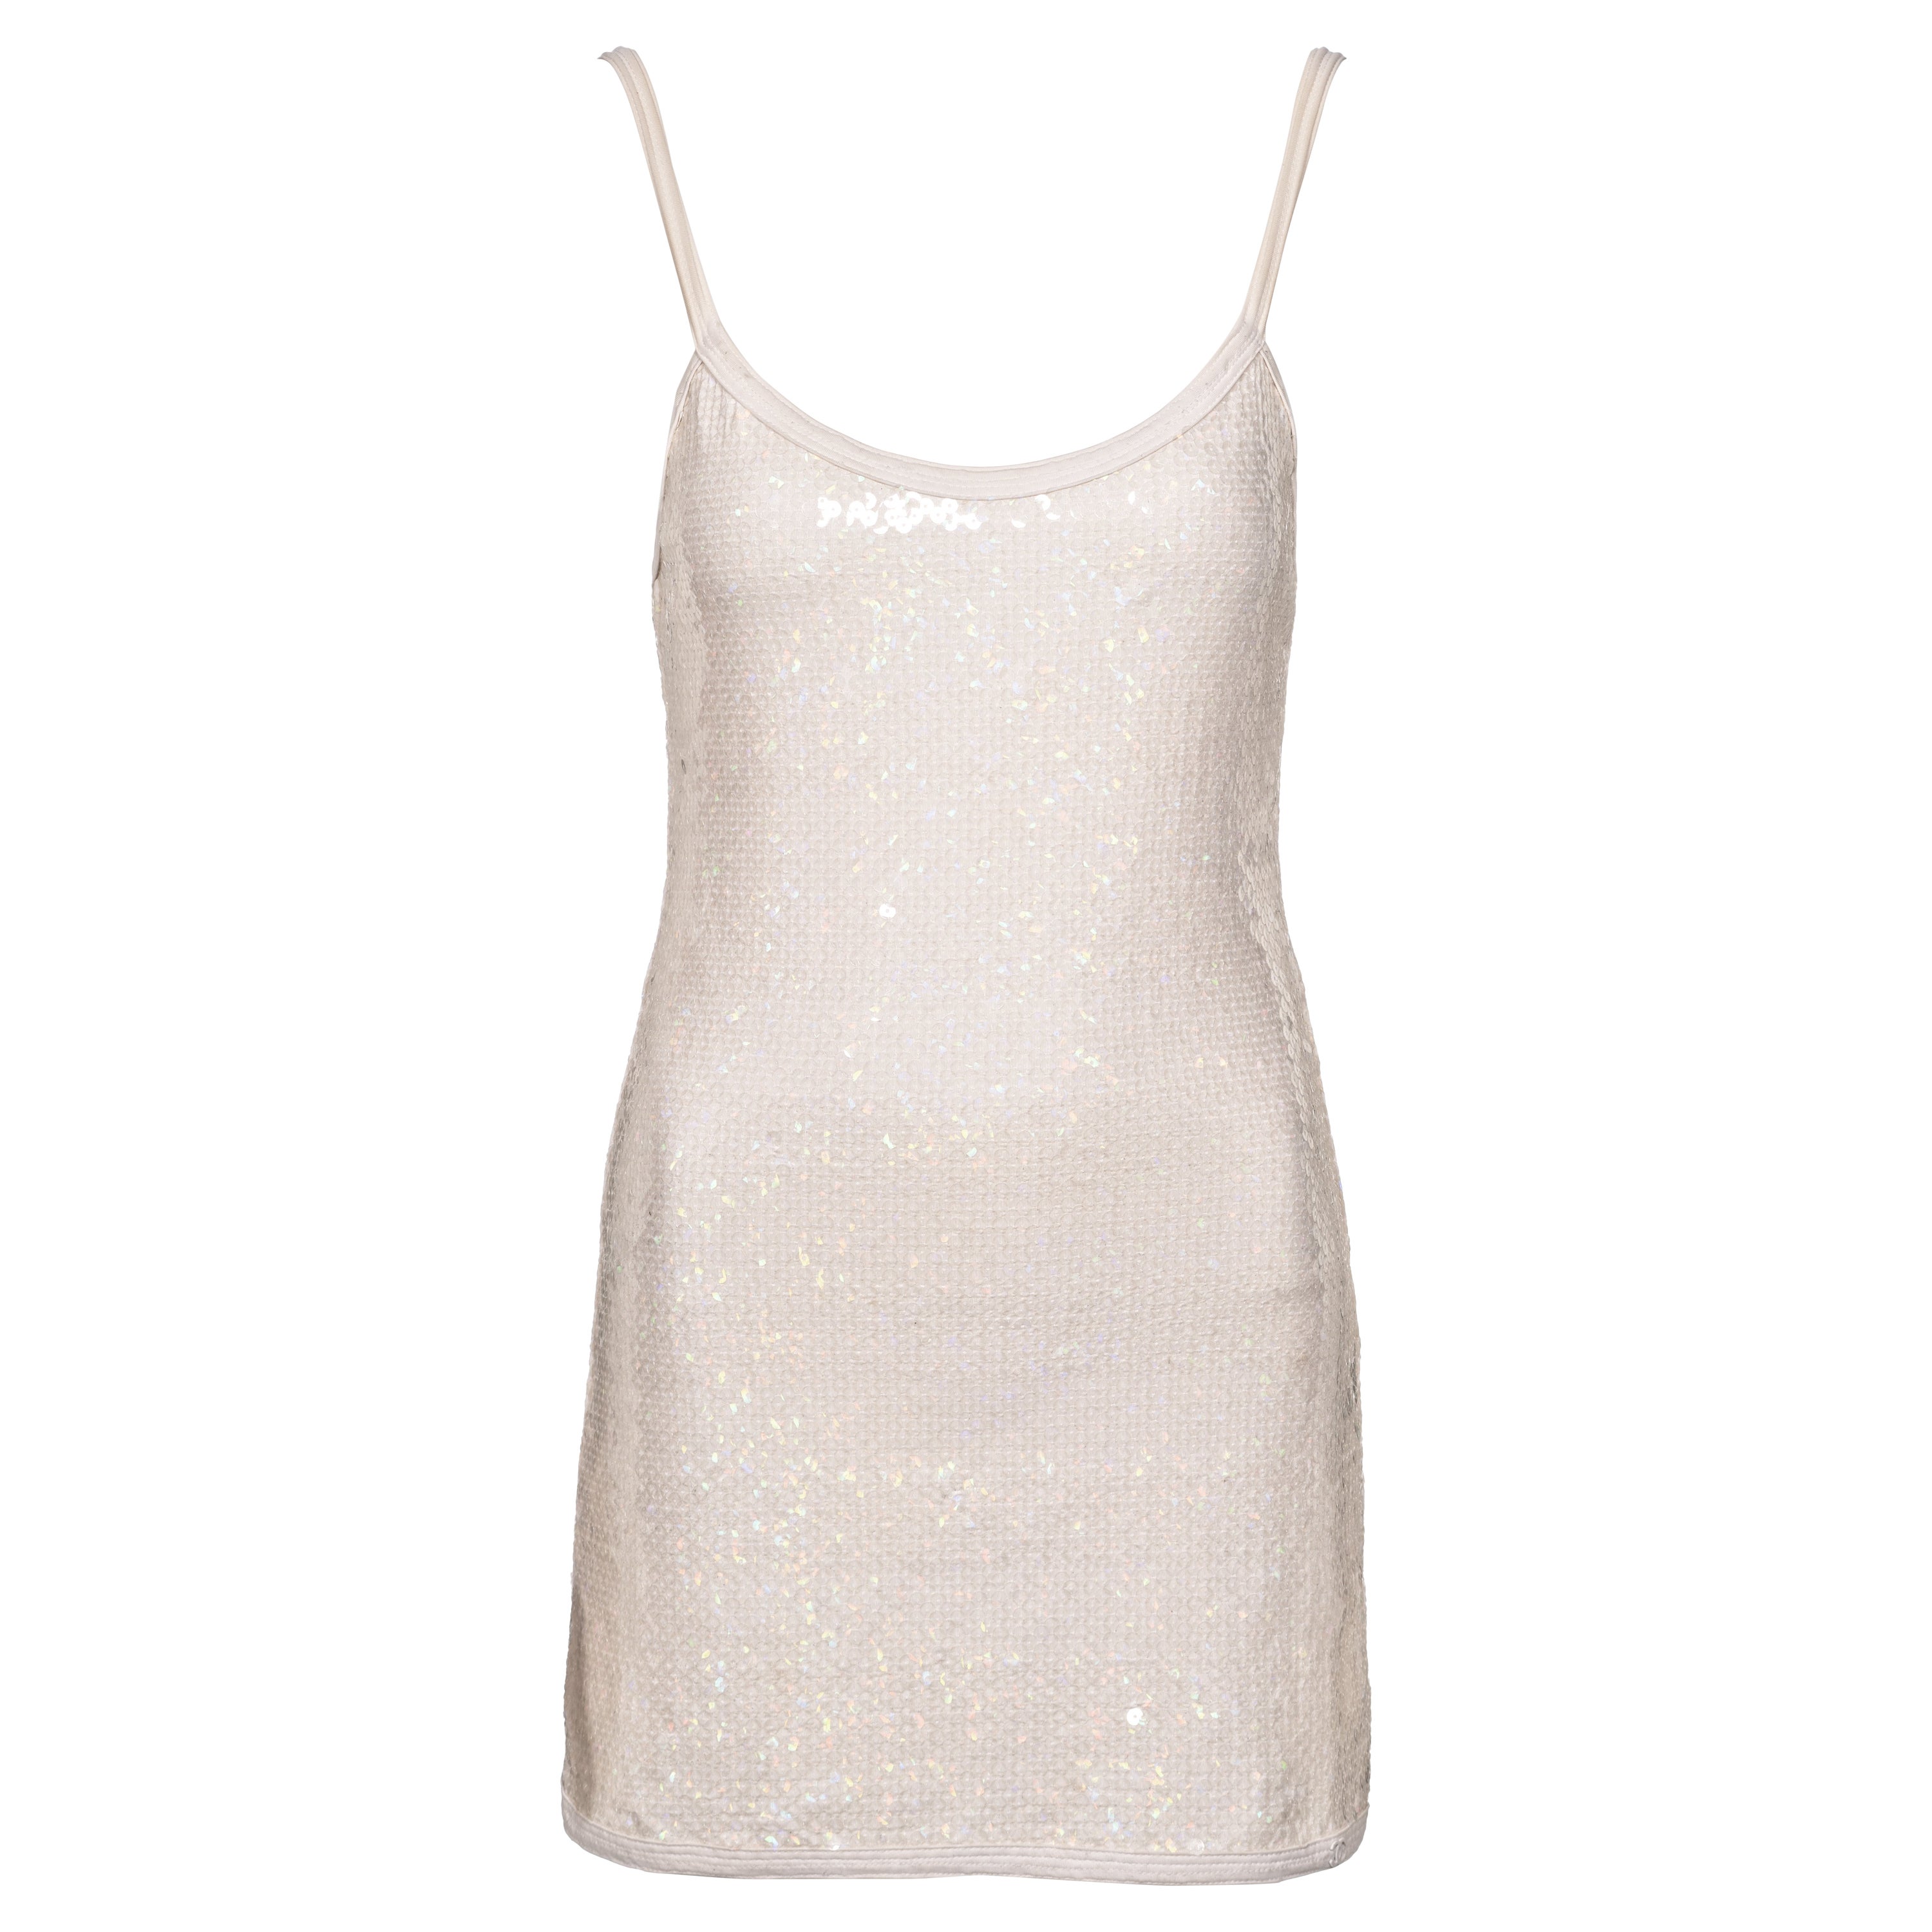 Chanel by Karl Lagerfeld White Iridescent Sequin Mini Dress, ss 2005 For Sale